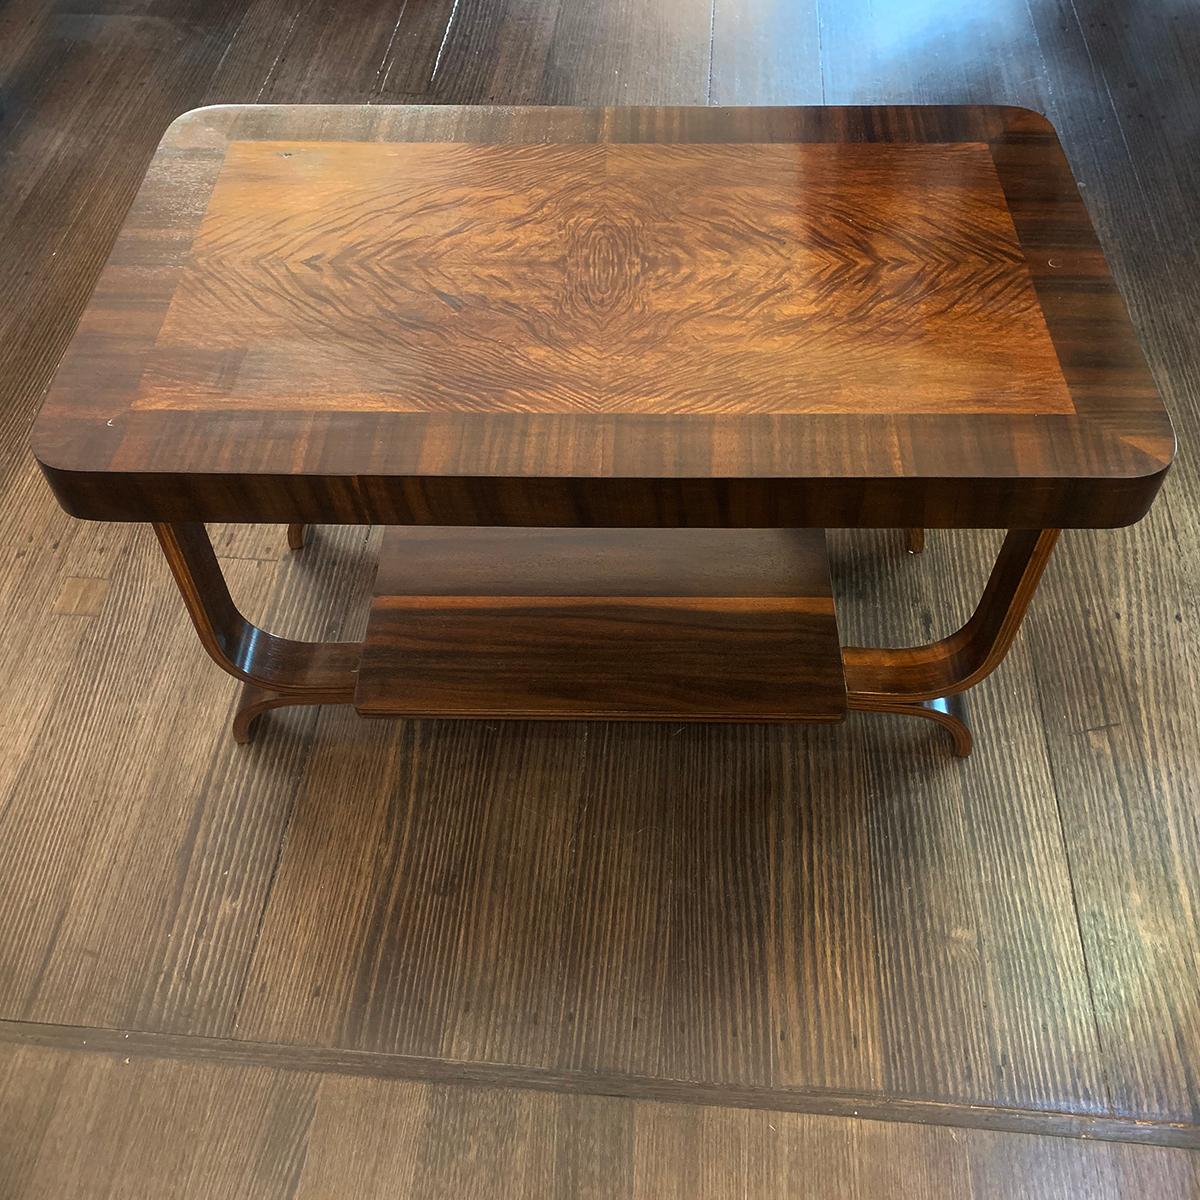 Art Deco coffee table with spectacular inlaid top and bentwood legs and supports, with lower shelf for magazines, etc. The upper inlay is 360 degree symmetrical with intensive grain detail, meeting at the quarter points. The lower shelf has also